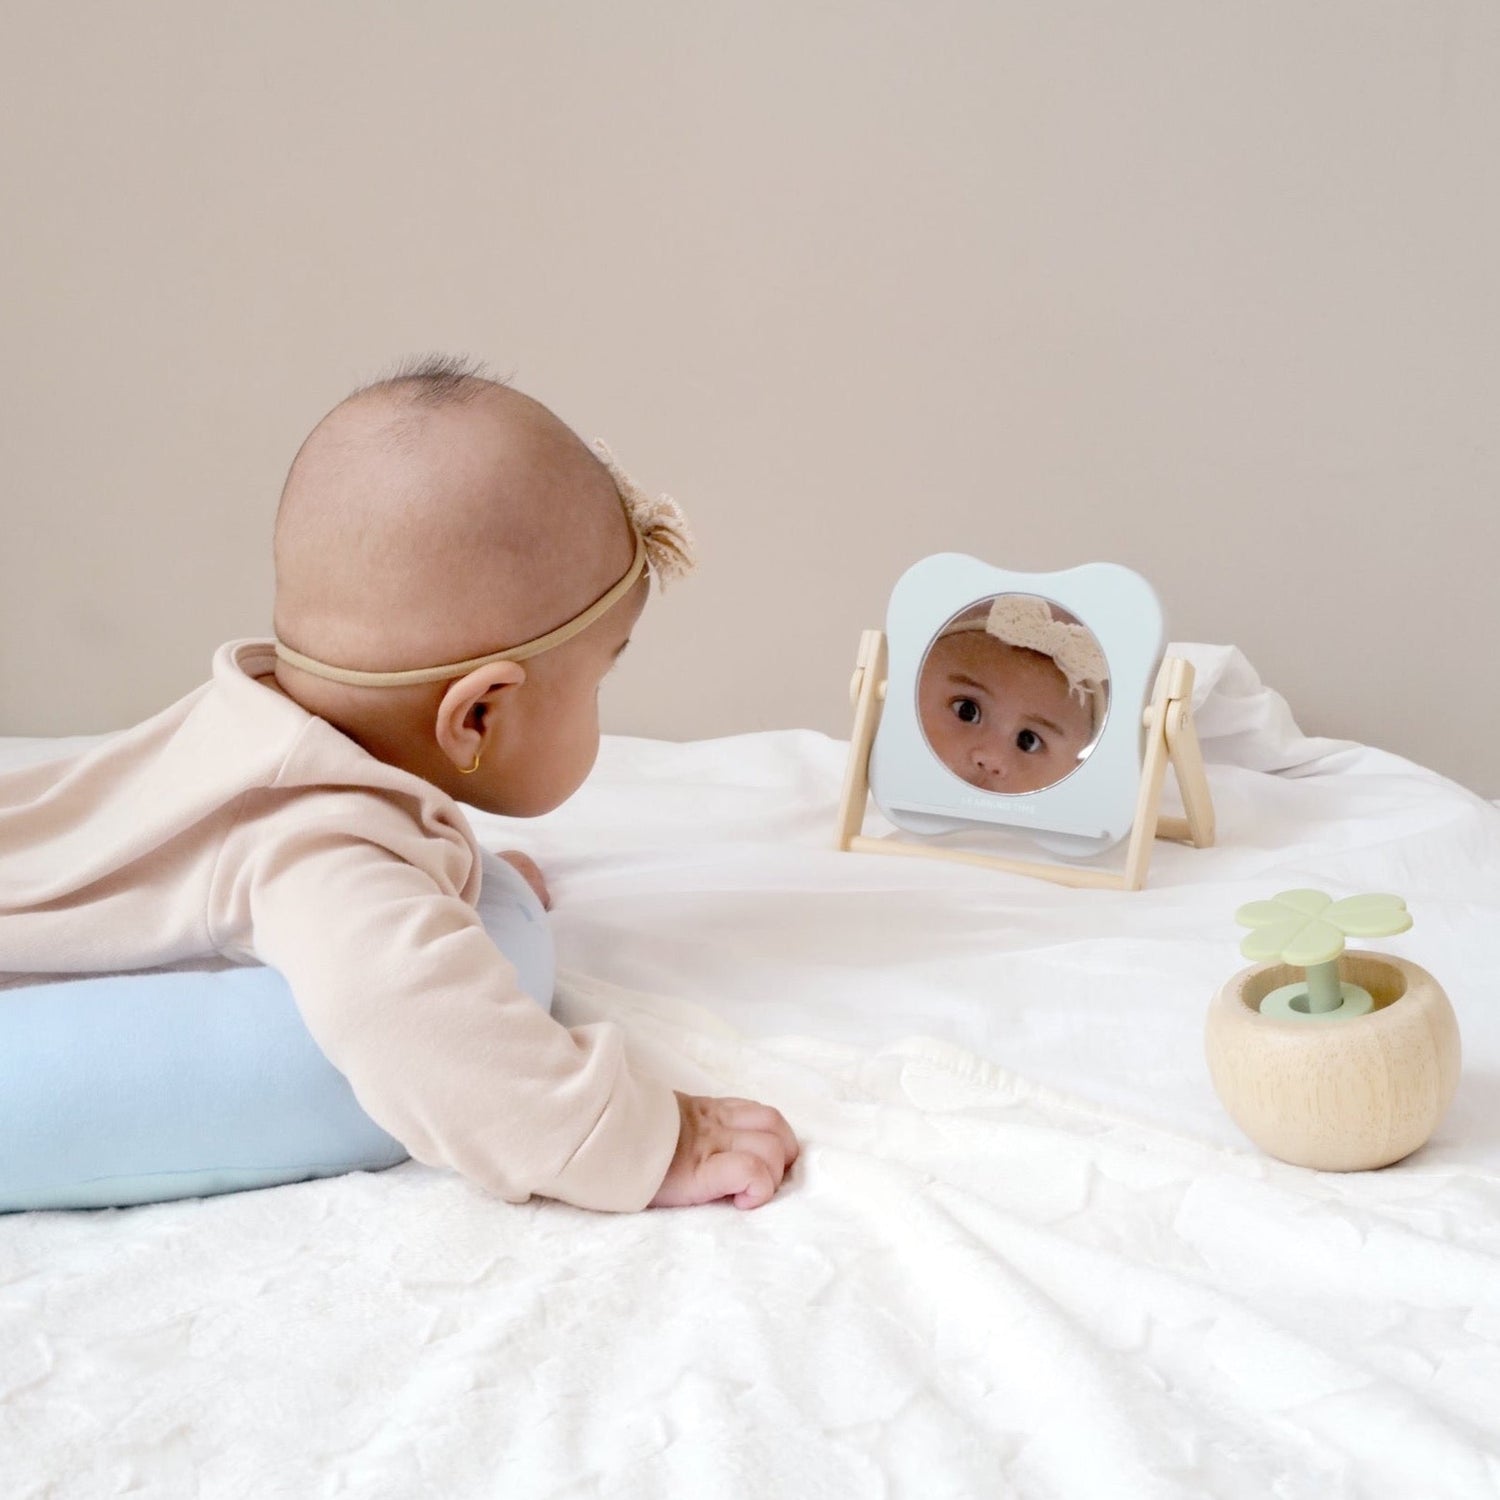 Learning Time  The Tummy Time Kit (1 to 6 months) – Learning Time HK